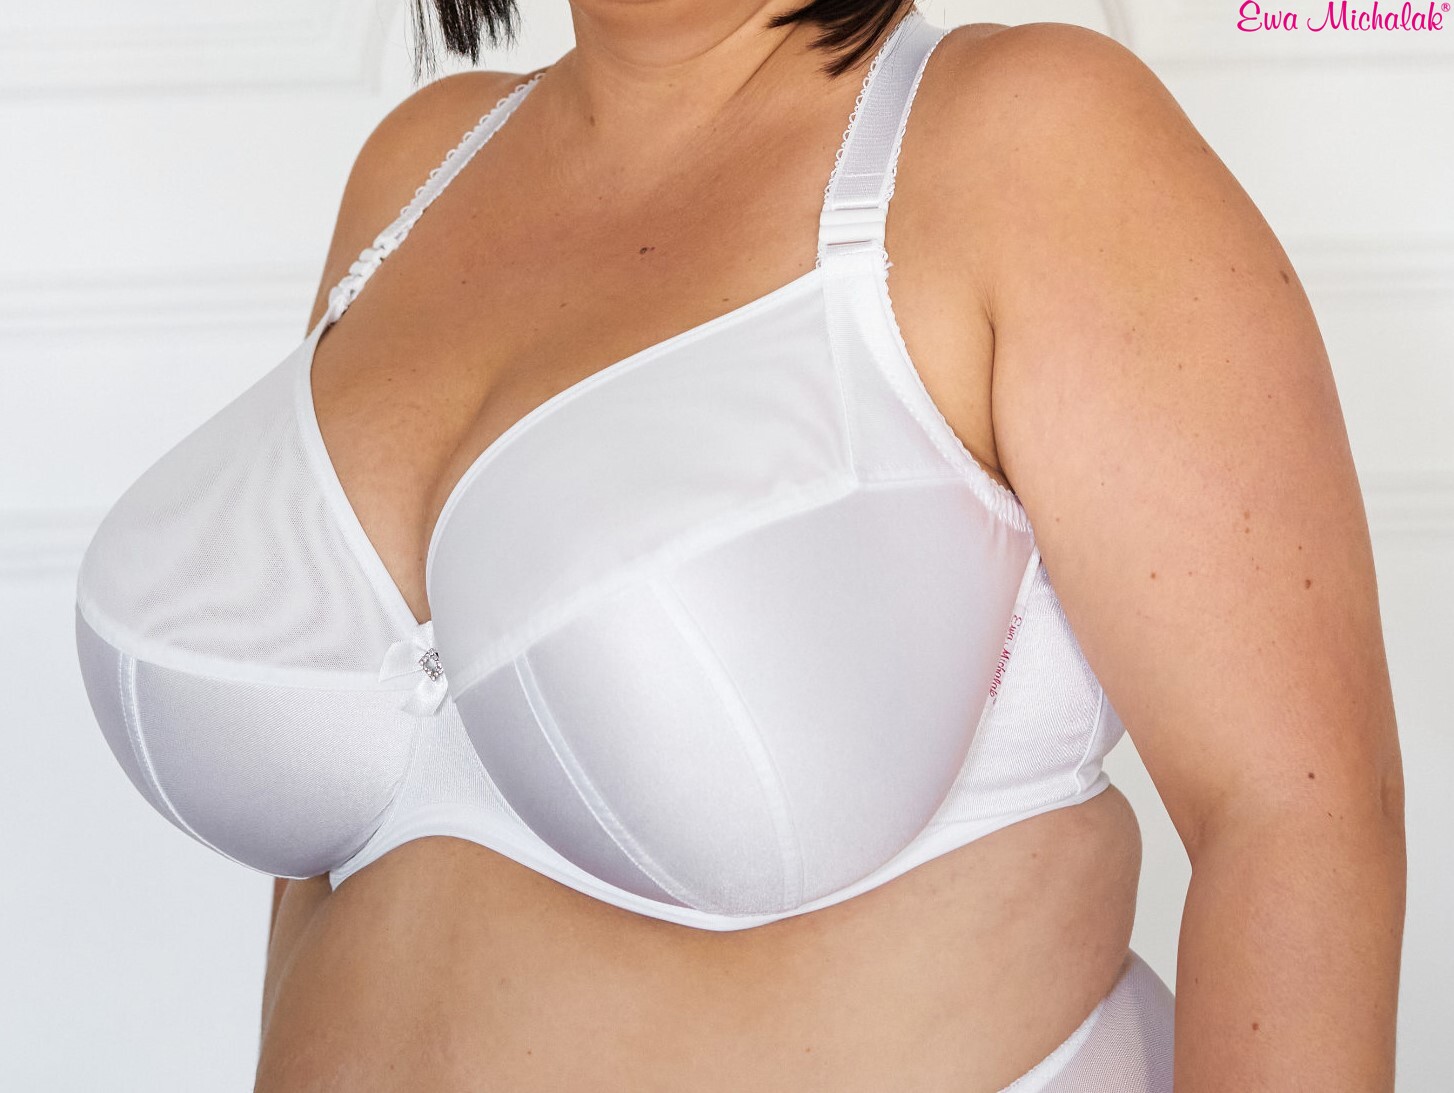 Bra FB-PL Angel  BRAS \ Soft Cup Bras with Underwire BRAS \ Multiway Bras  with Convertible Straps BRAS \ ALL BRAS \ Bras for Narrow Shoulders BRAS \  Bras for Very